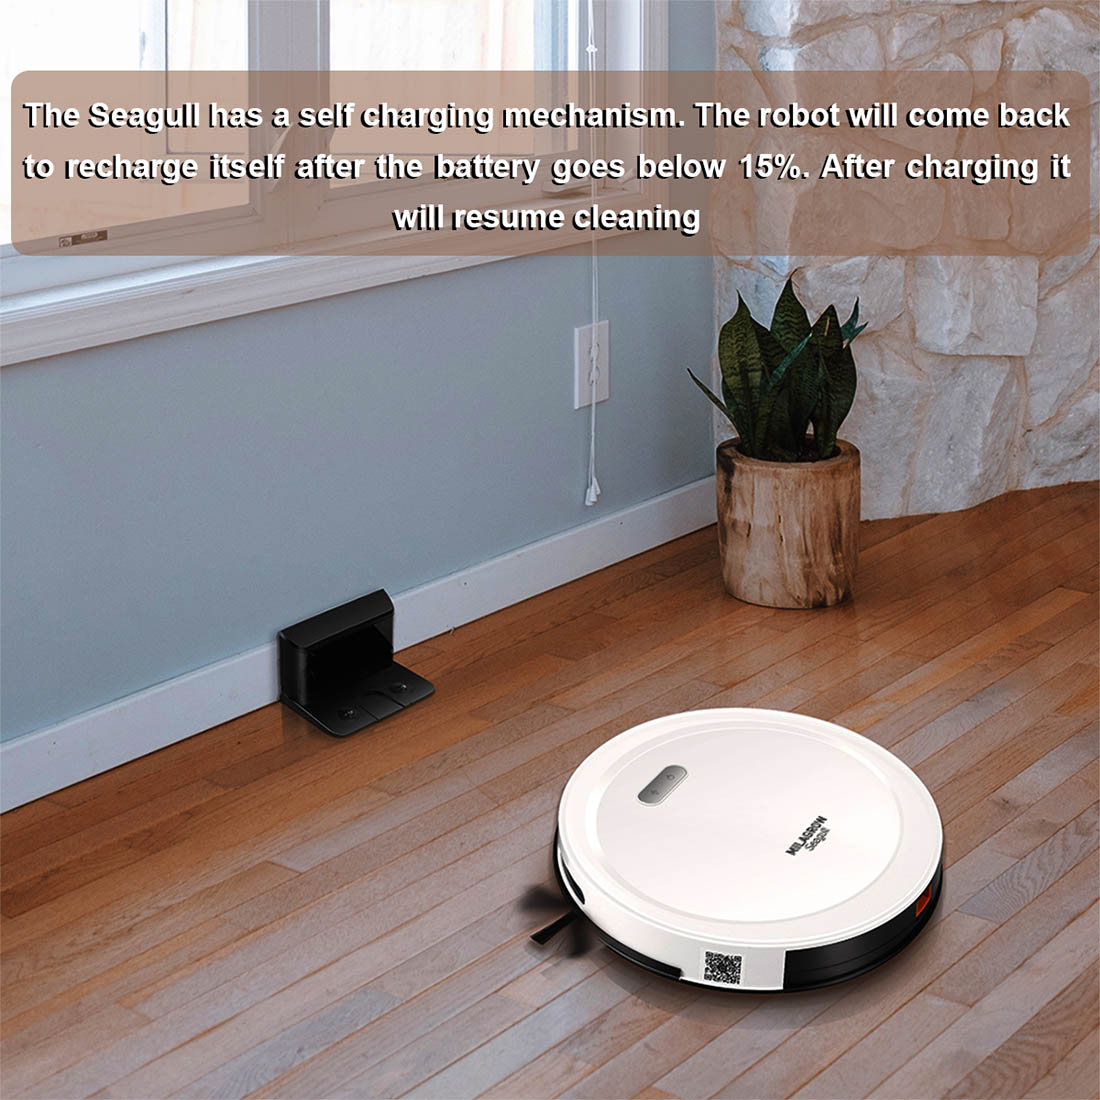 Milagrow Seagull Joy Full Dry and Slight Wet Mopping Robotic Vacuum Cleaner with Scheduling and Self-Charging